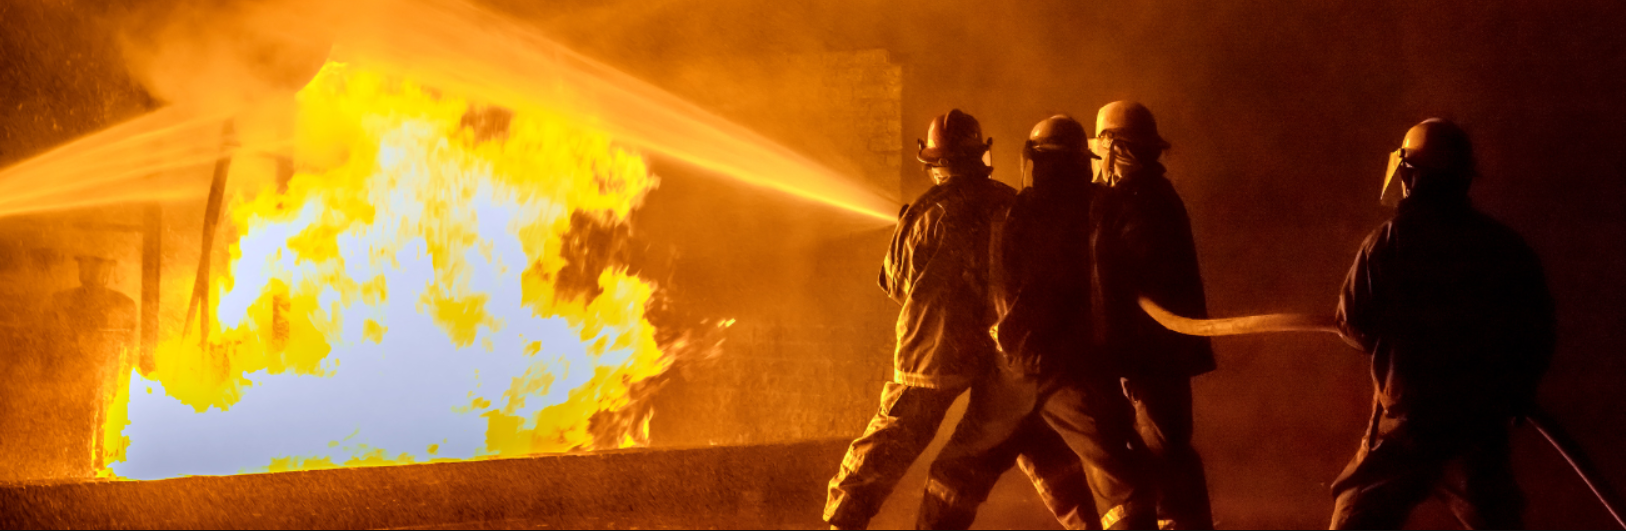 5 Data Challenges Fire Services Face (and How to Overcome Them)